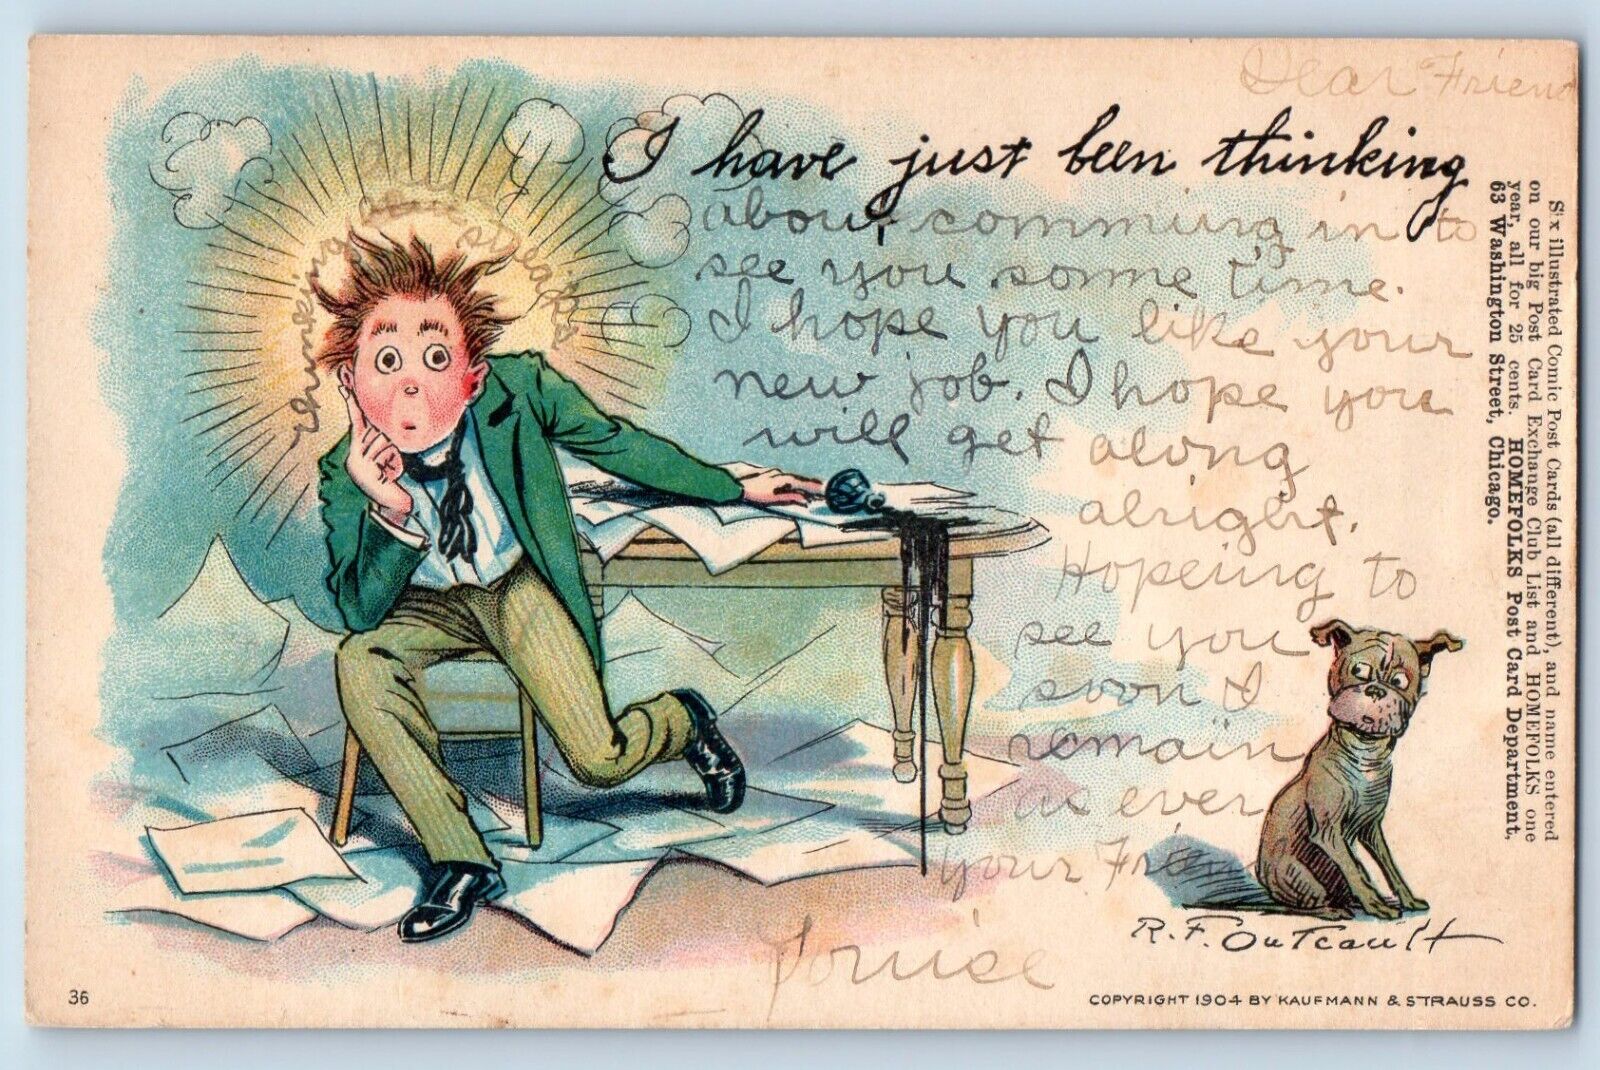 Outcault Signed Artist Postcard I Have Just Been Thinking Man Ink Fell Dog 1906